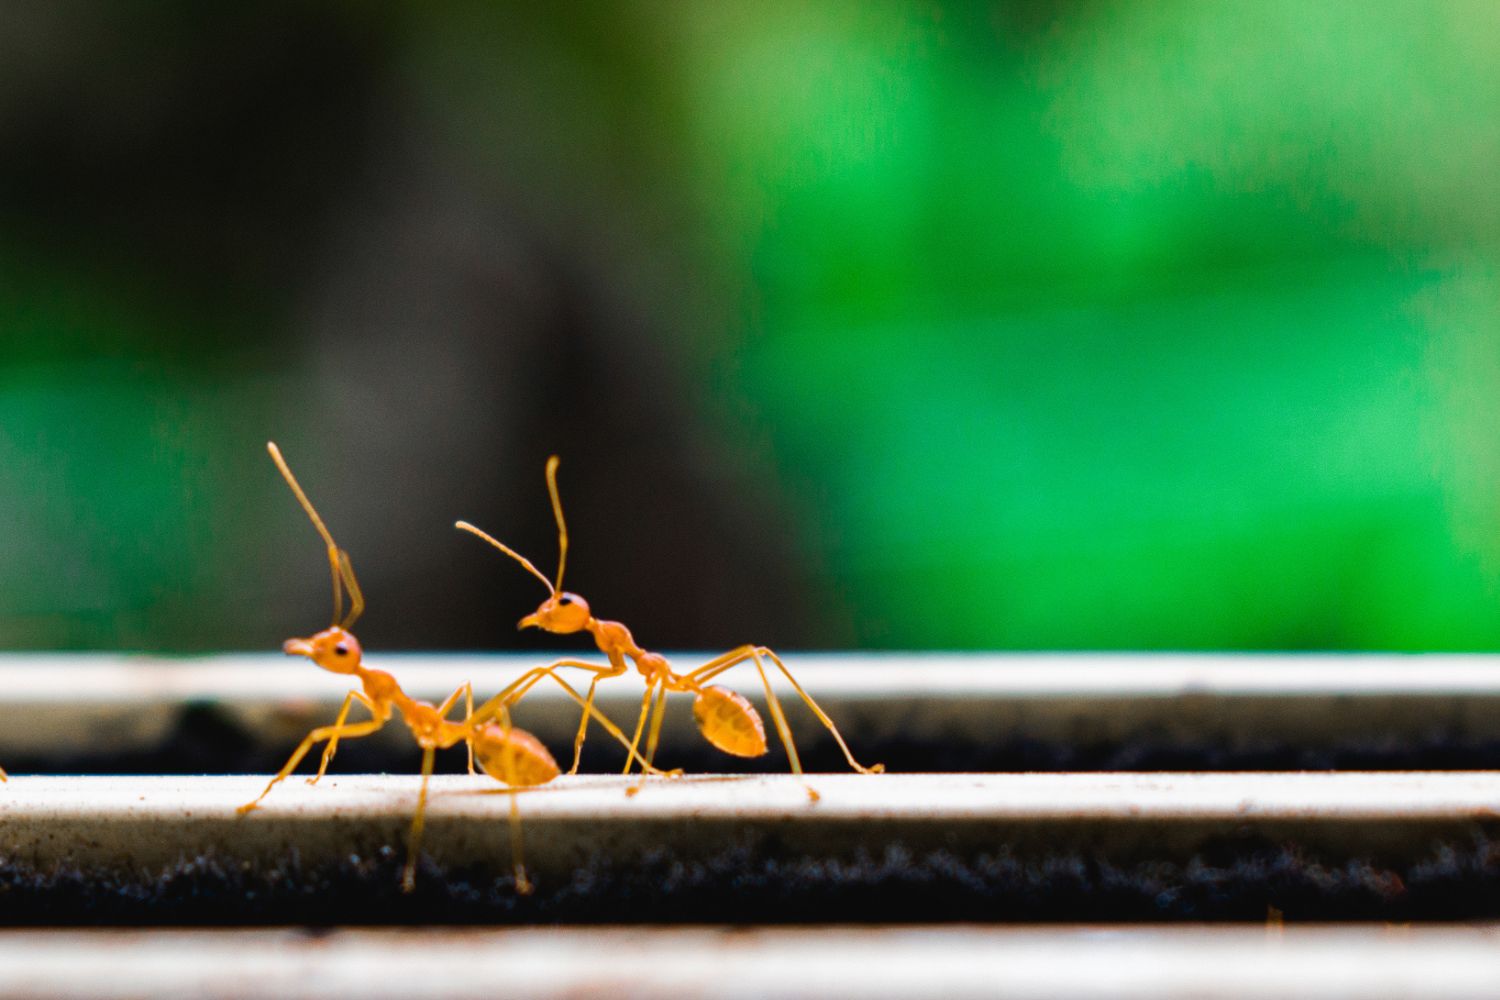 fire ants are now a threat to all of australia – here's what you should know